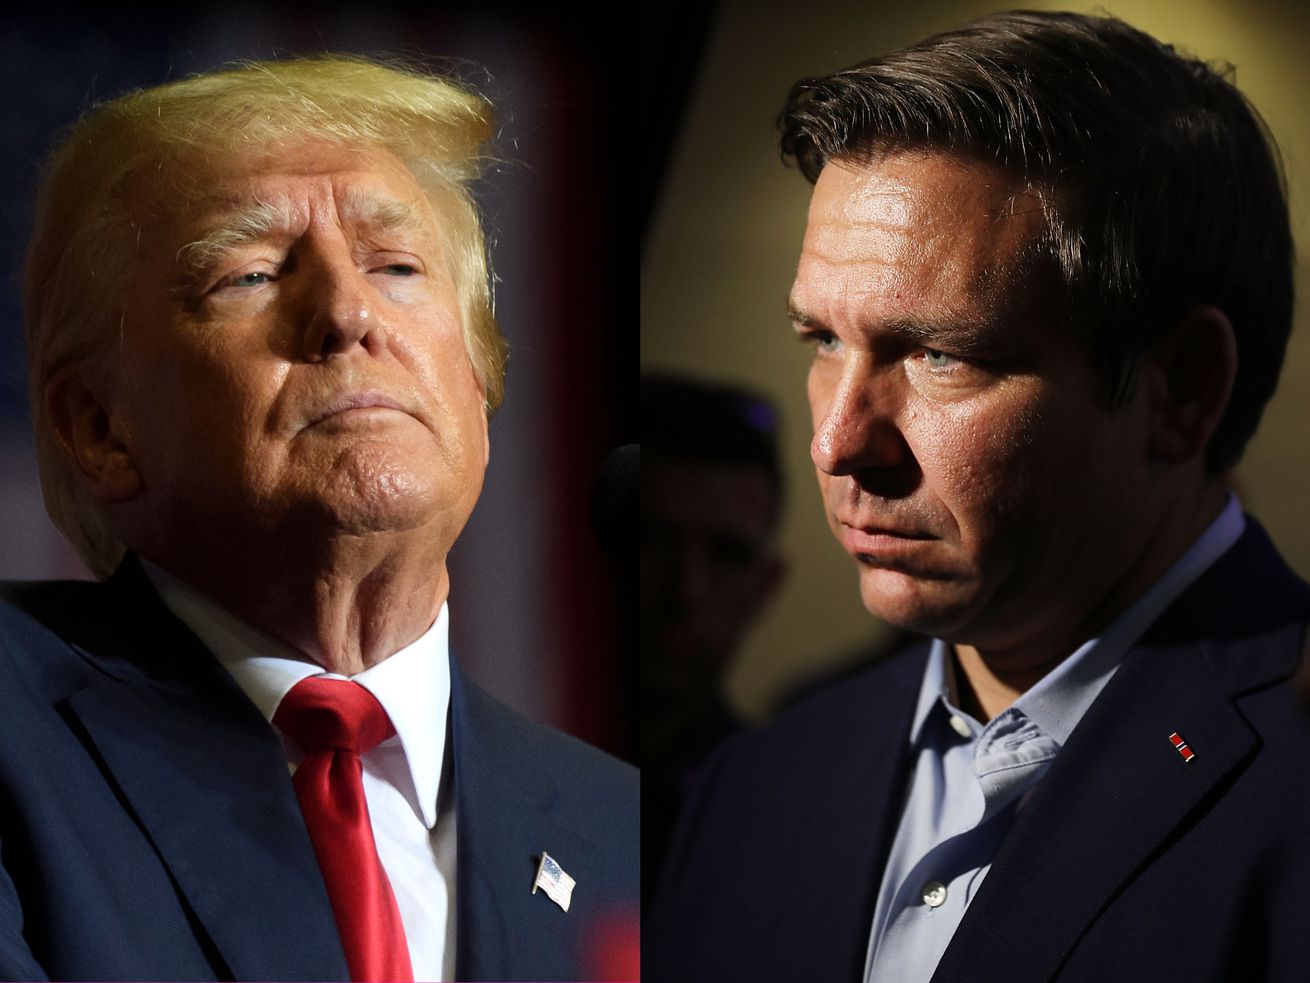 On the left, former President Donald Trump, looking down, and on the right, Florida Gov. Ron DeSantis, looking to the left. 